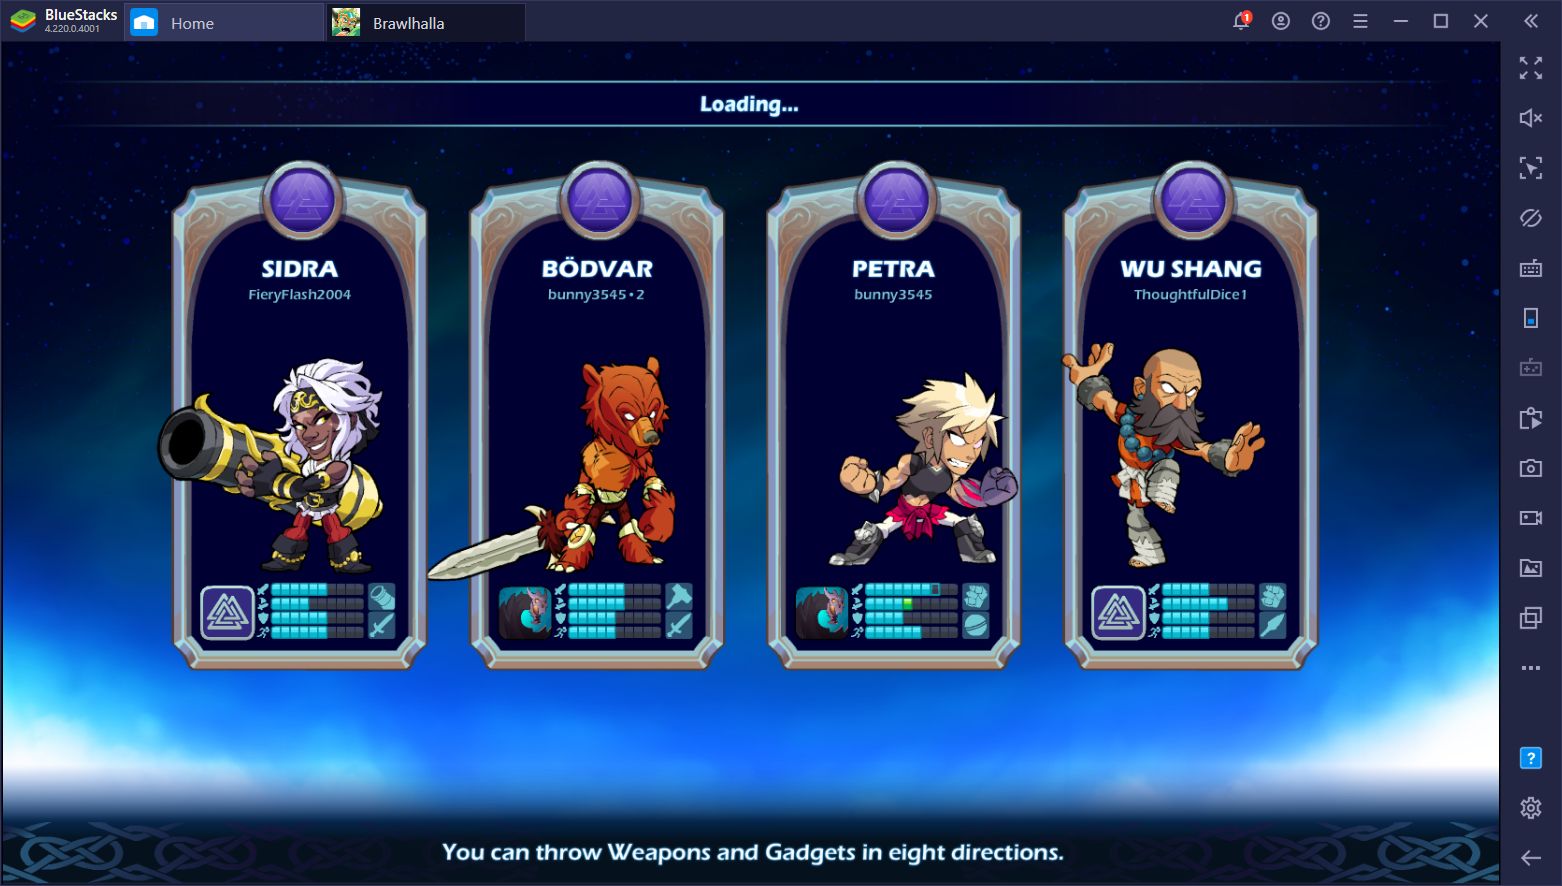 Brawlhalla on BlueStacks - Our First Impressions of the New Mobile Version